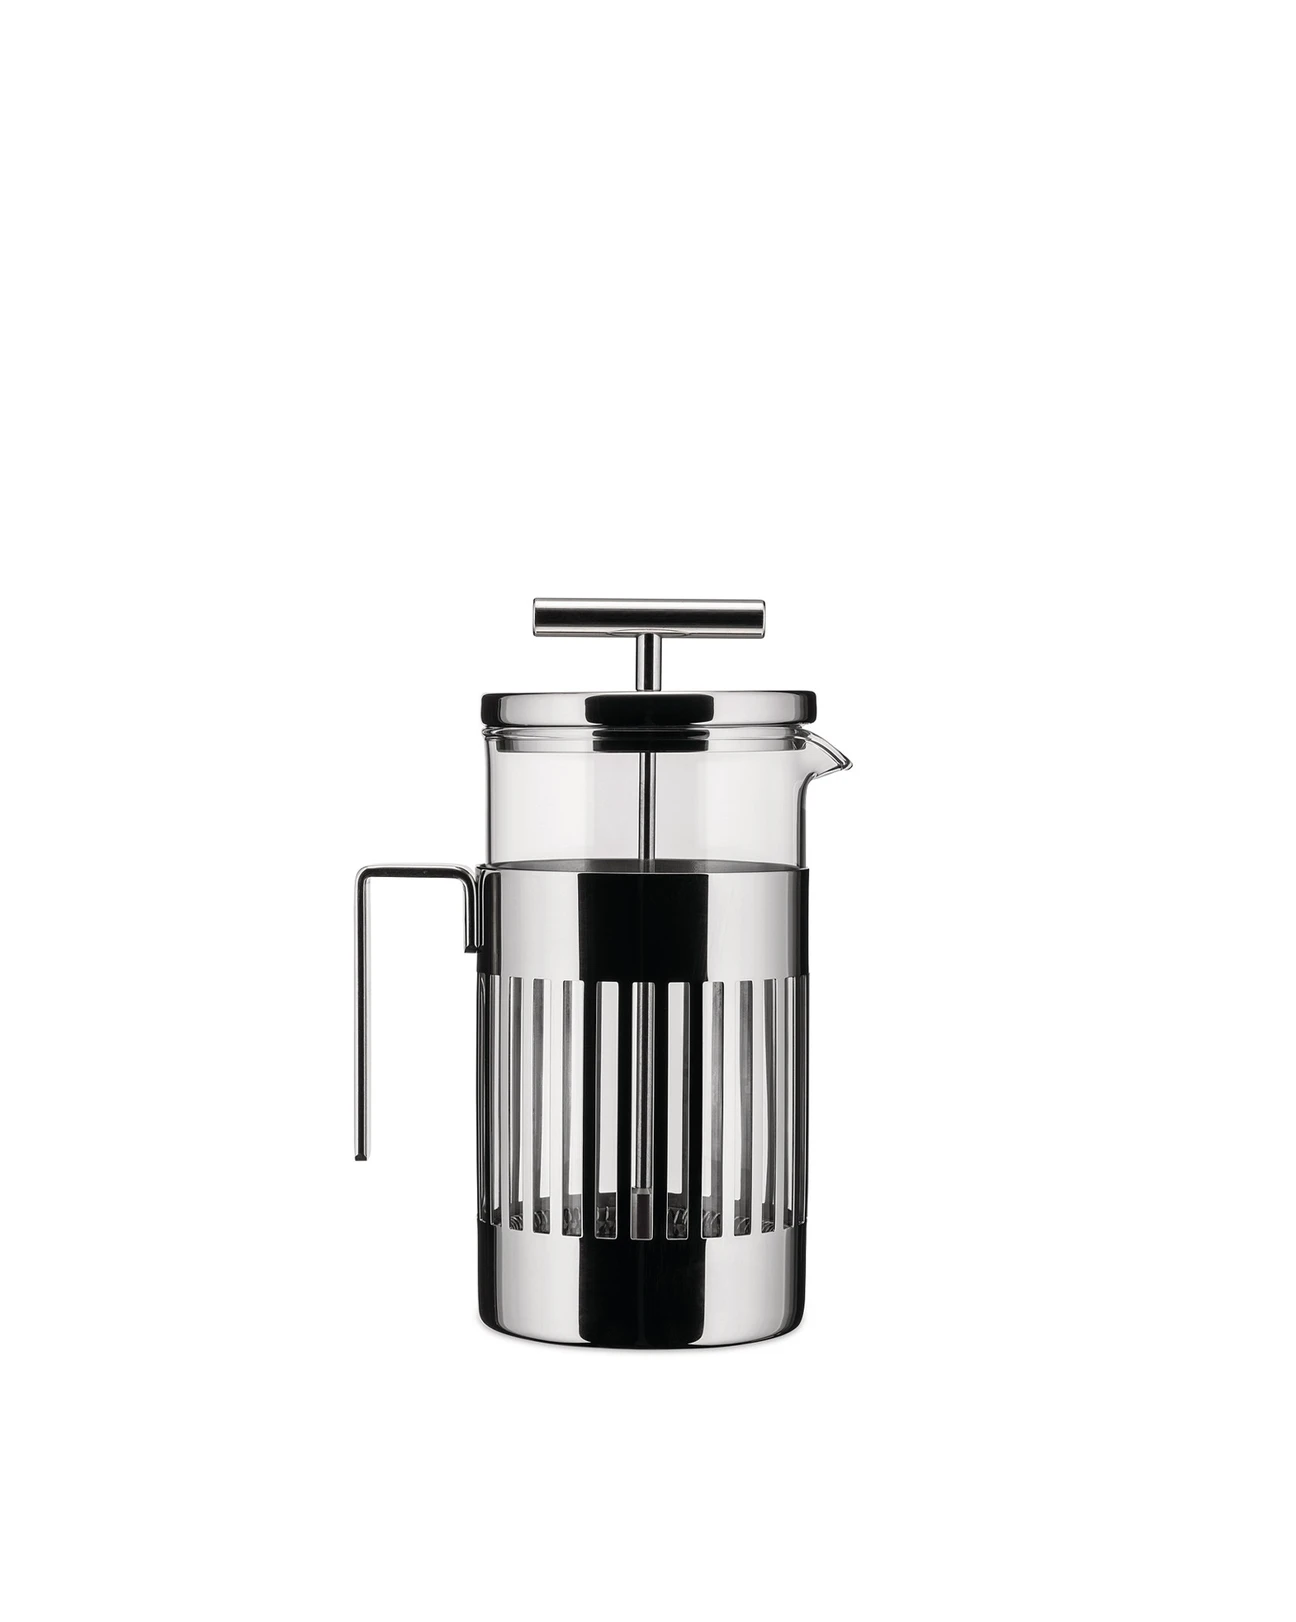 Alessi Press-filter coffee maker or infuser, 3 cups